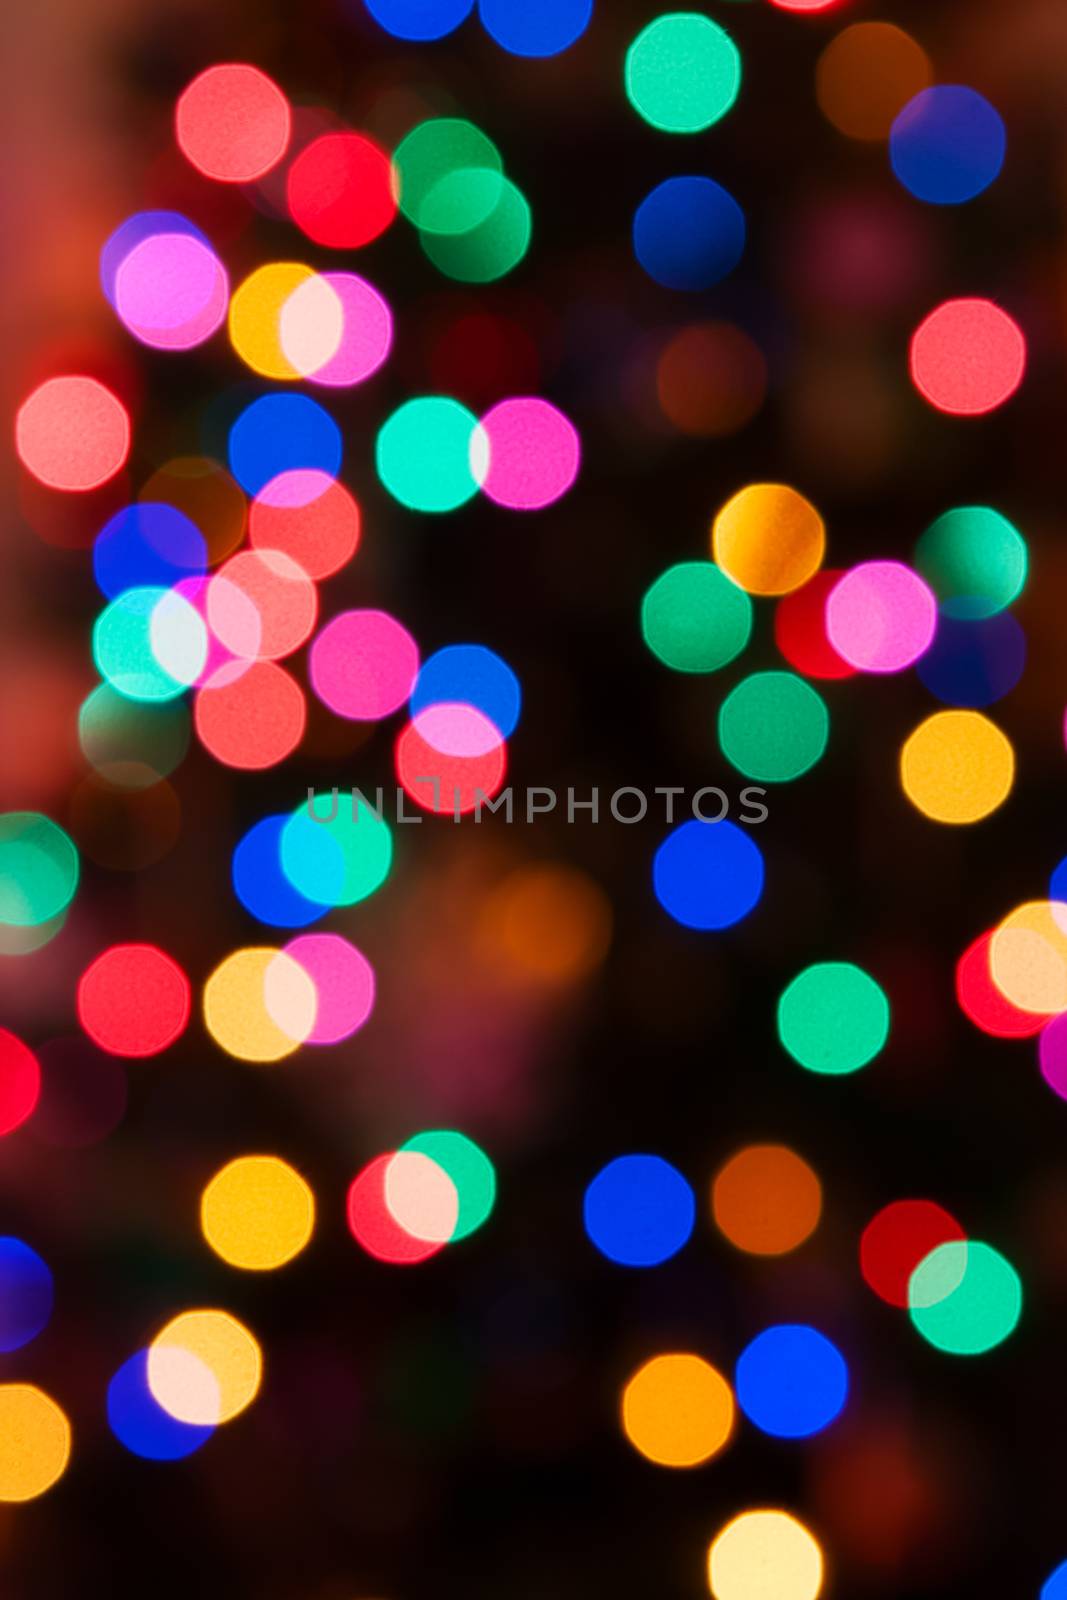 Glowing Christmas lights background by Coffee999